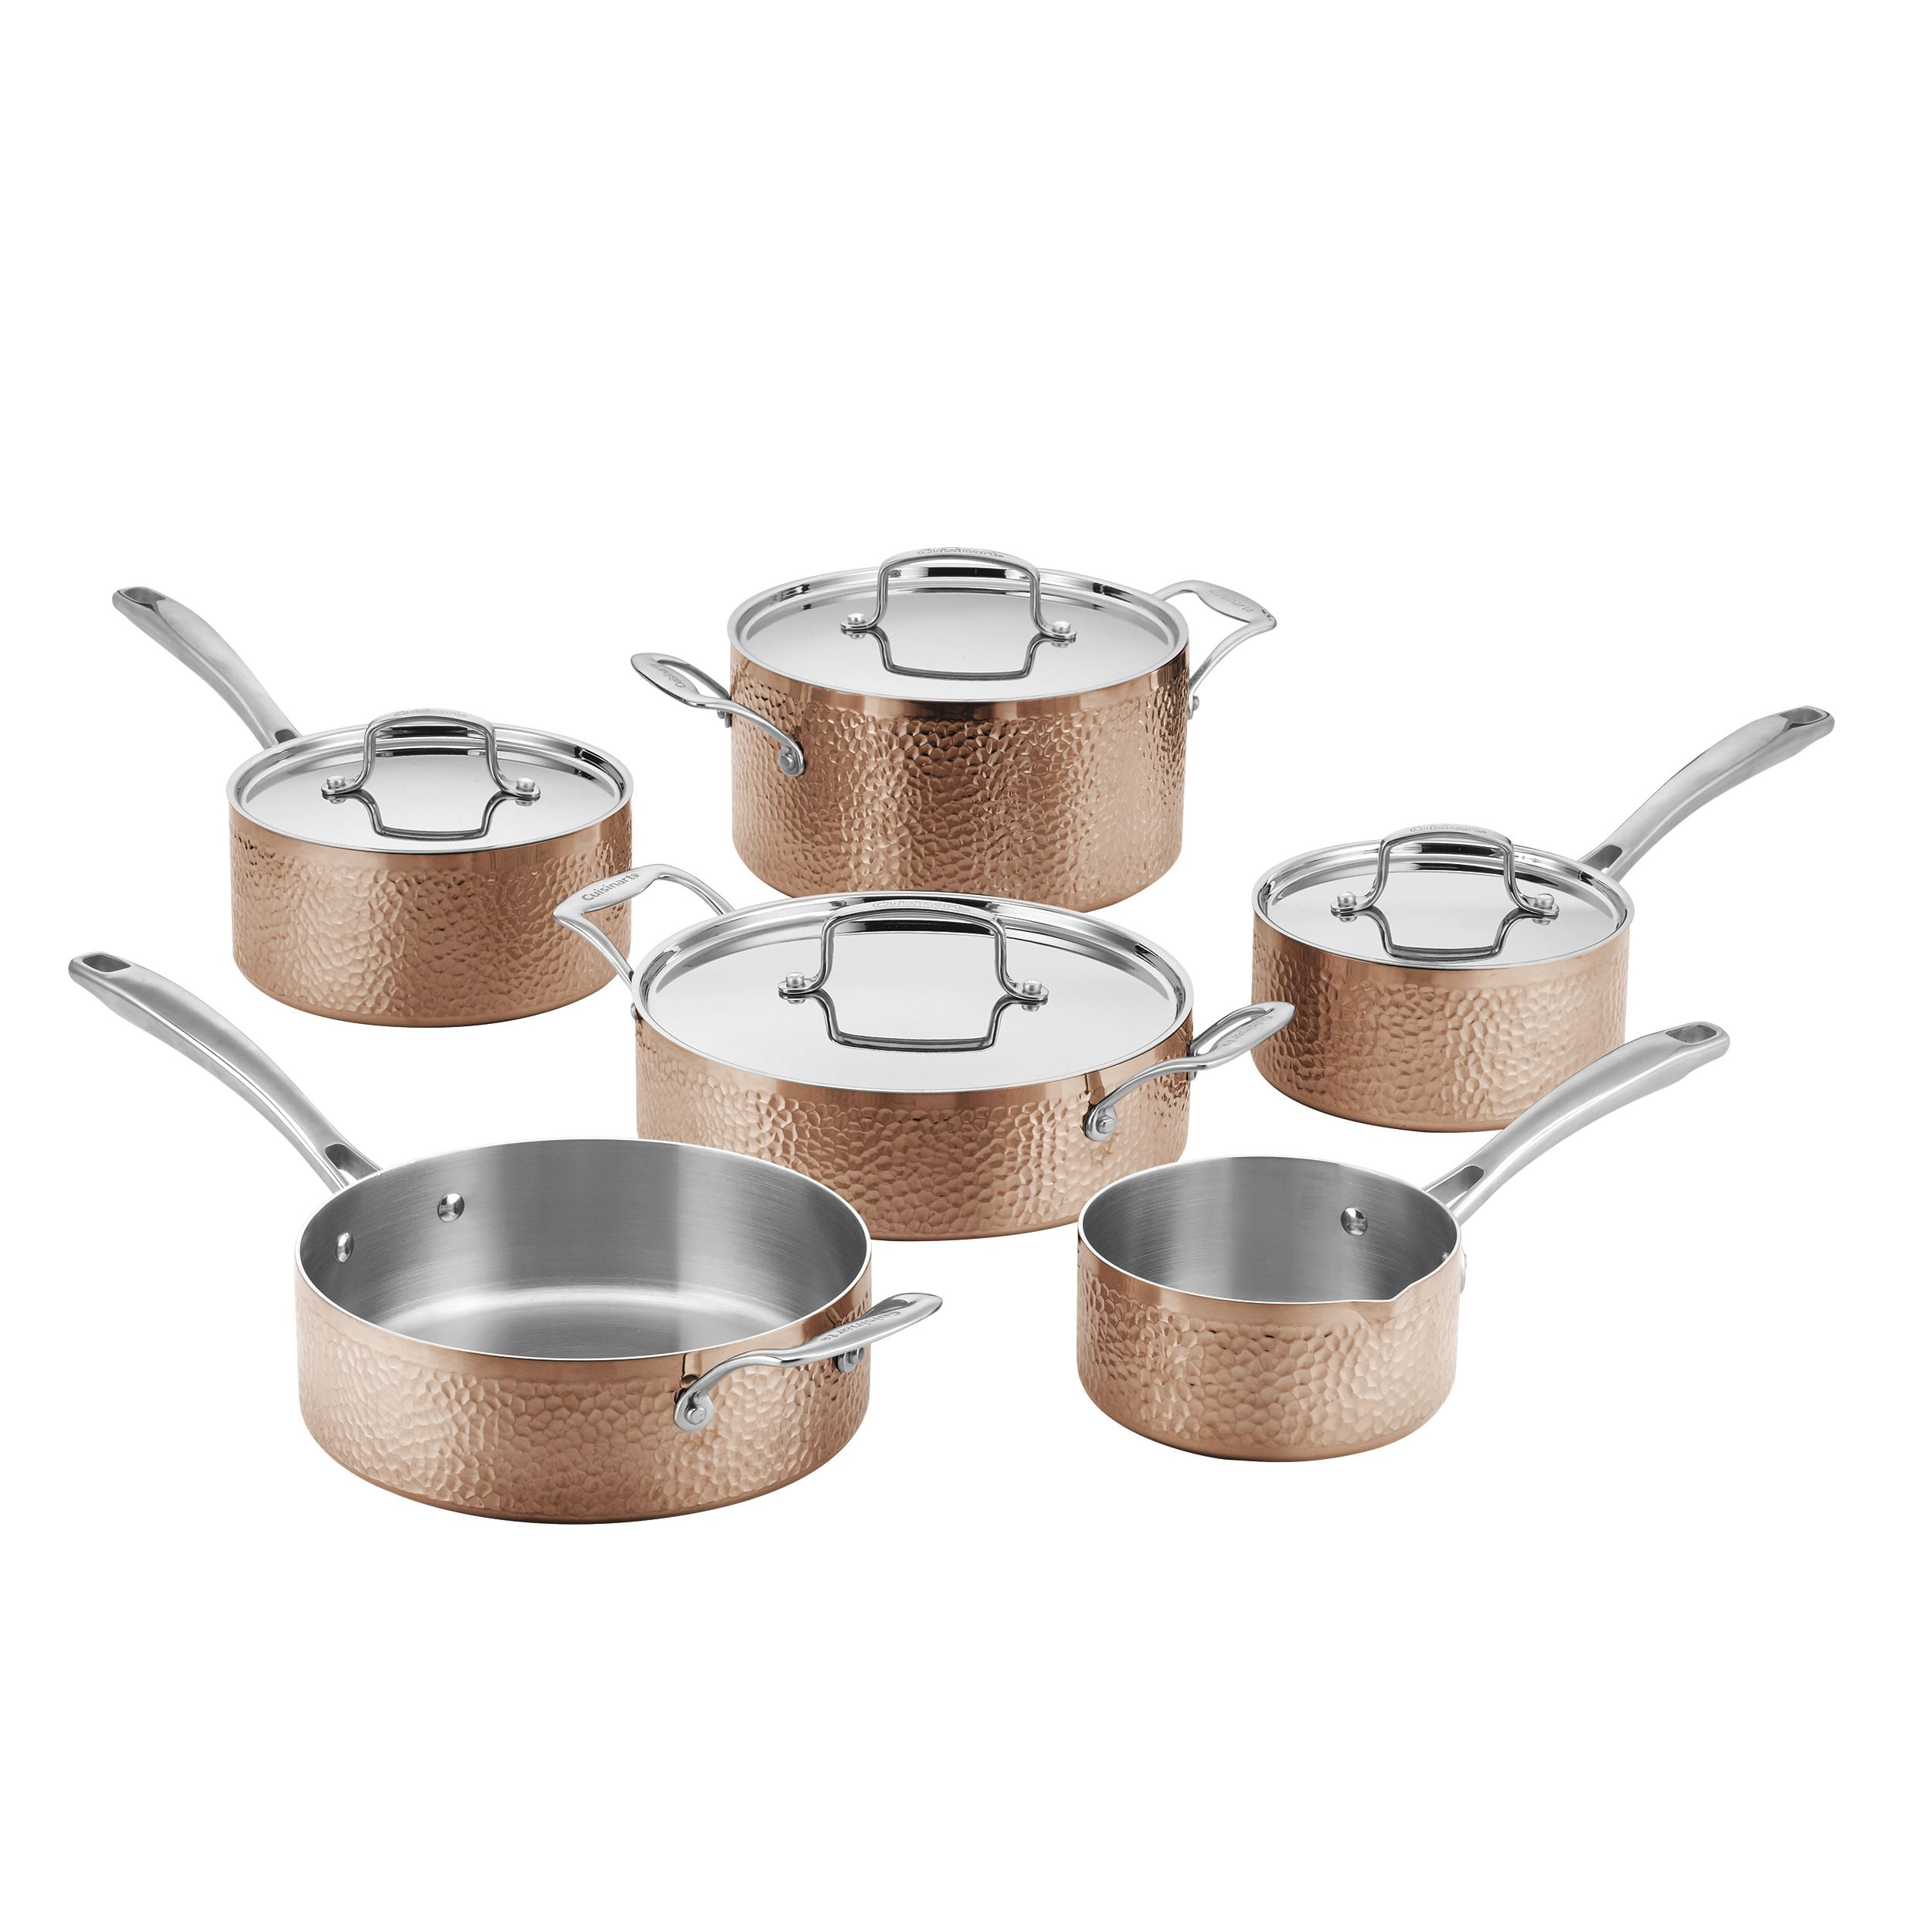 Cuisinart hammered tri ply stainless steel 9 piece cookware set Cuisinart 10 Piece Hammered Copper Cookware Set Walmart Com Walmart Com